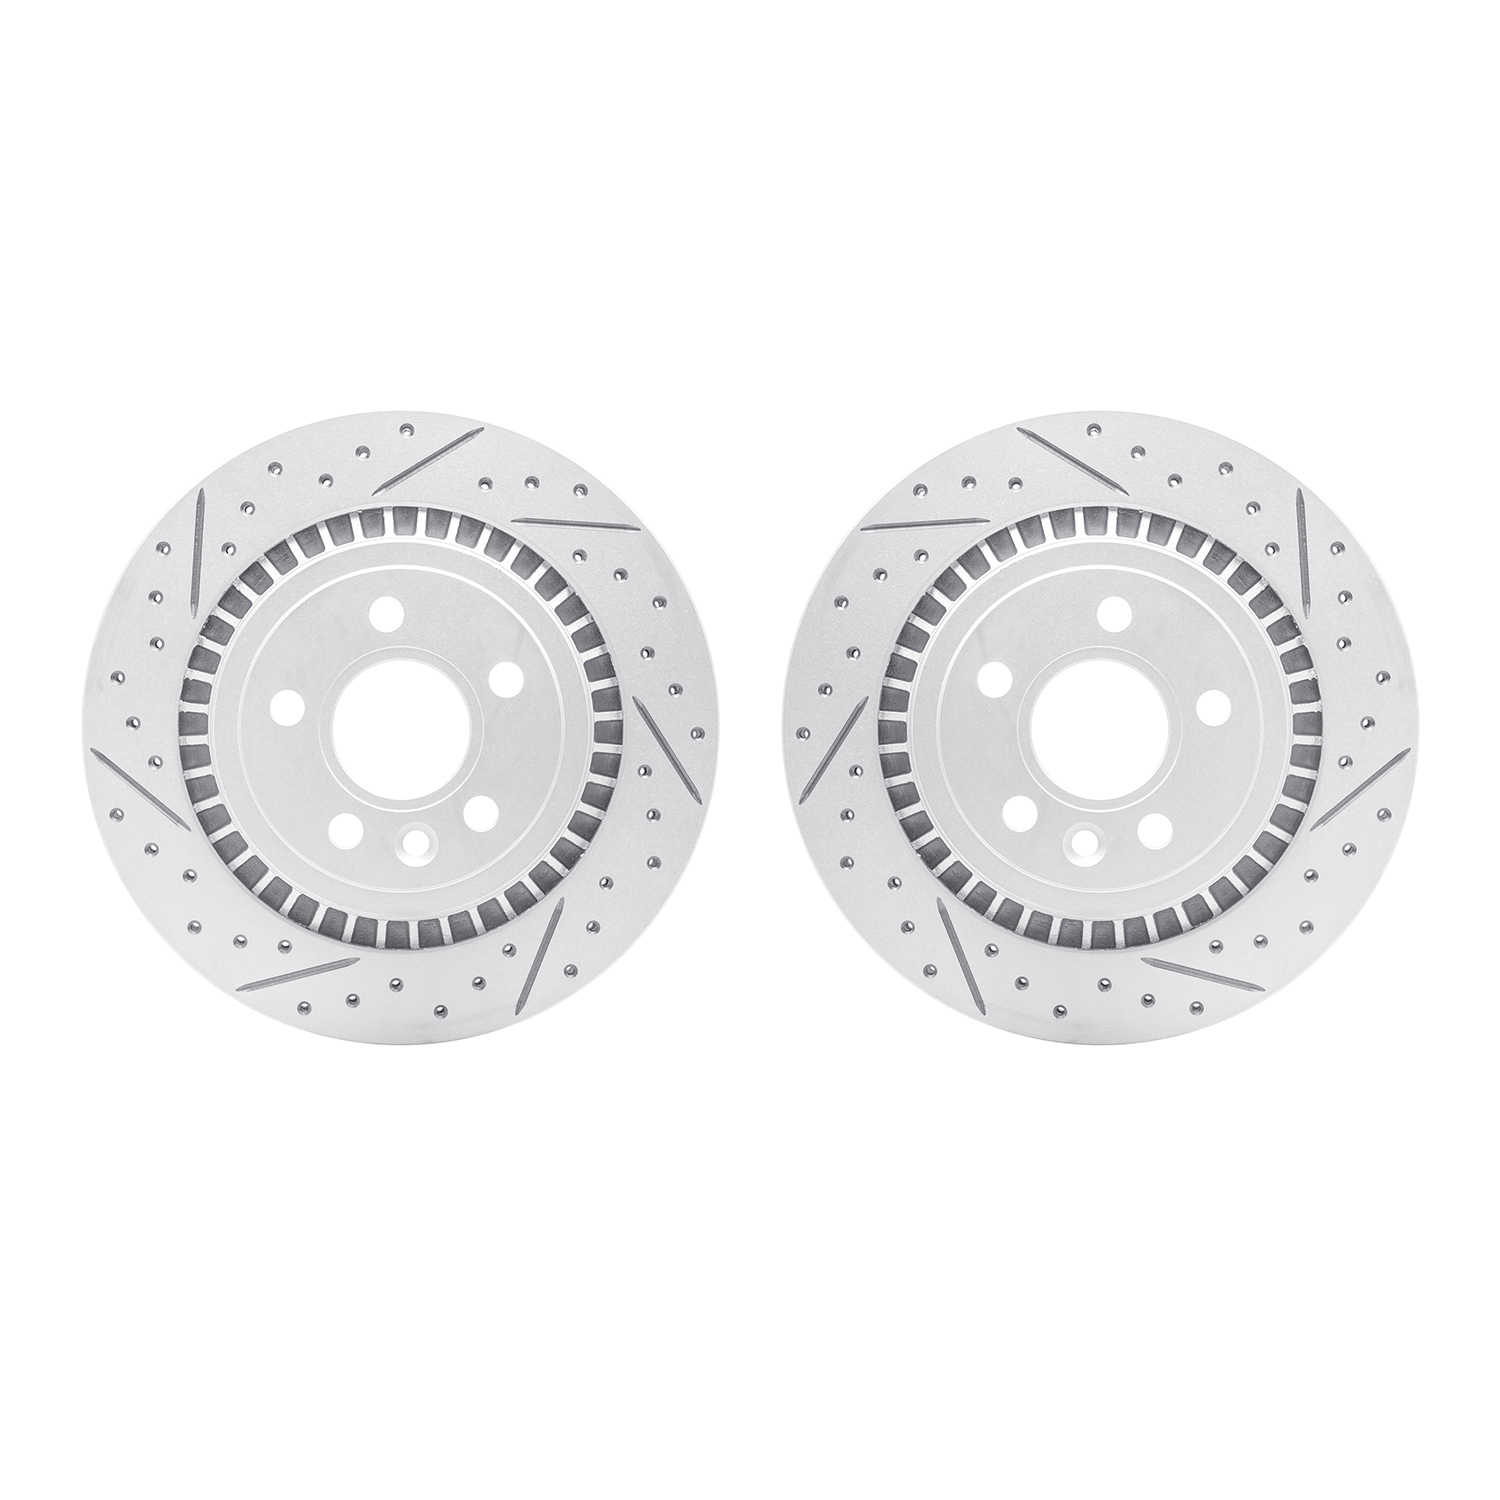 2002-27029 Geoperformance Drilled/Slotted Brake Rotors, 2008-2018 Volvo, Position: Rear